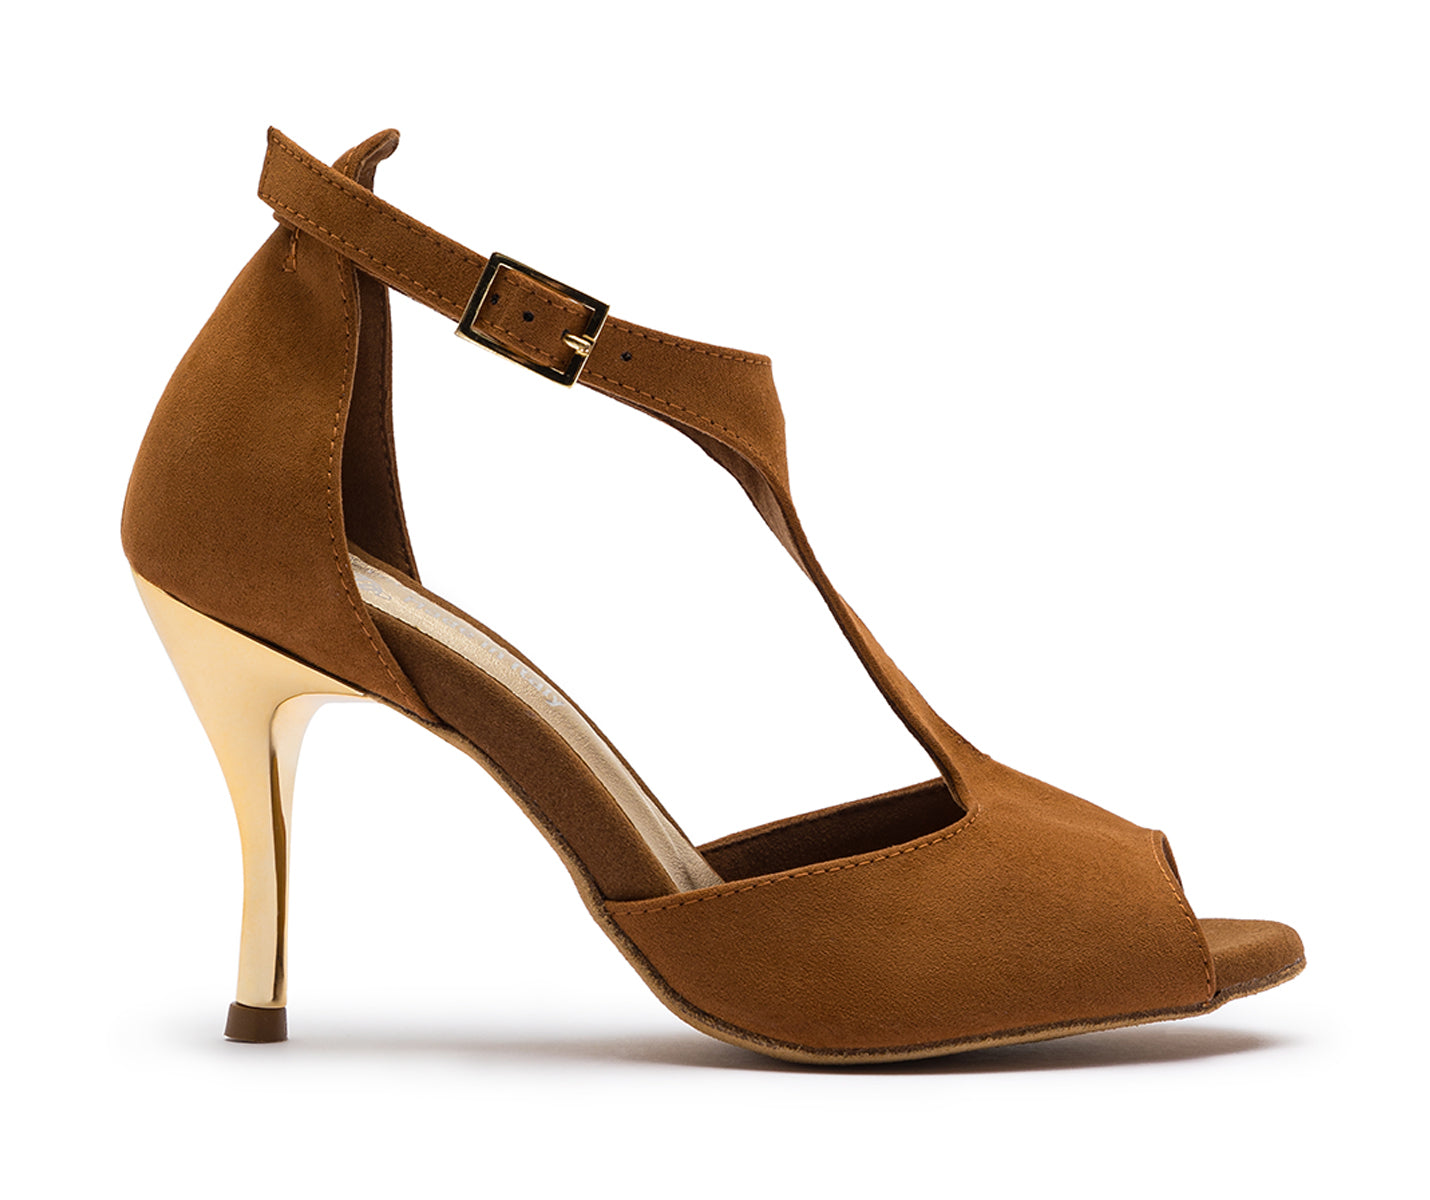 DQ1001 dance shoes in brown with suede sole